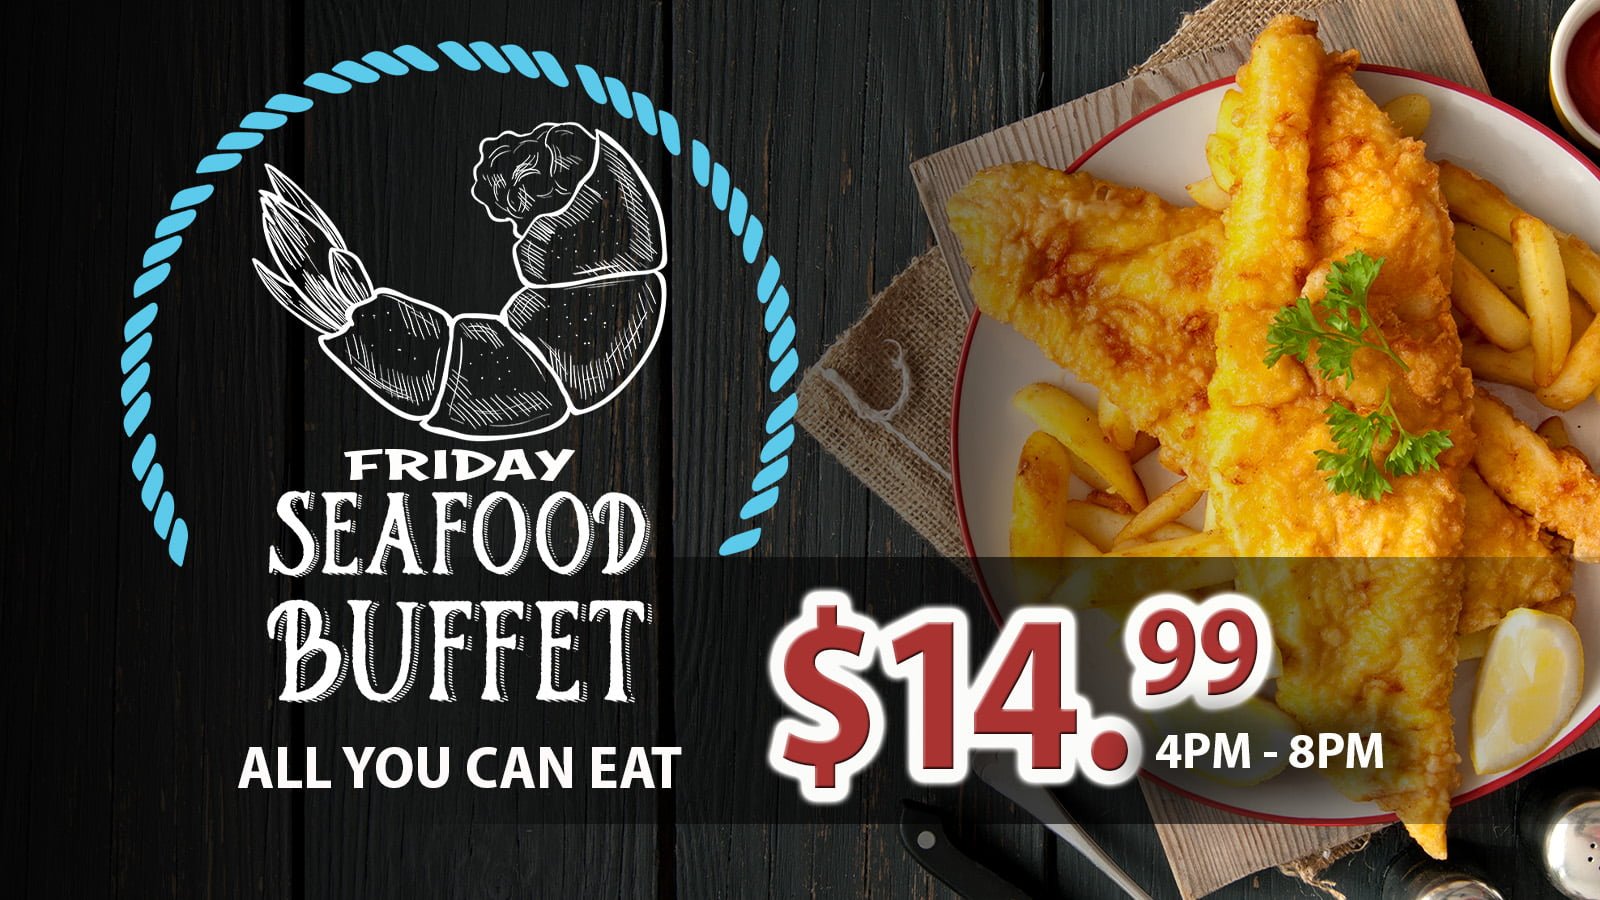 Enjoy A Seafood Buffet Every Friday At Mole Lake Casino In Crandon Wisconsin